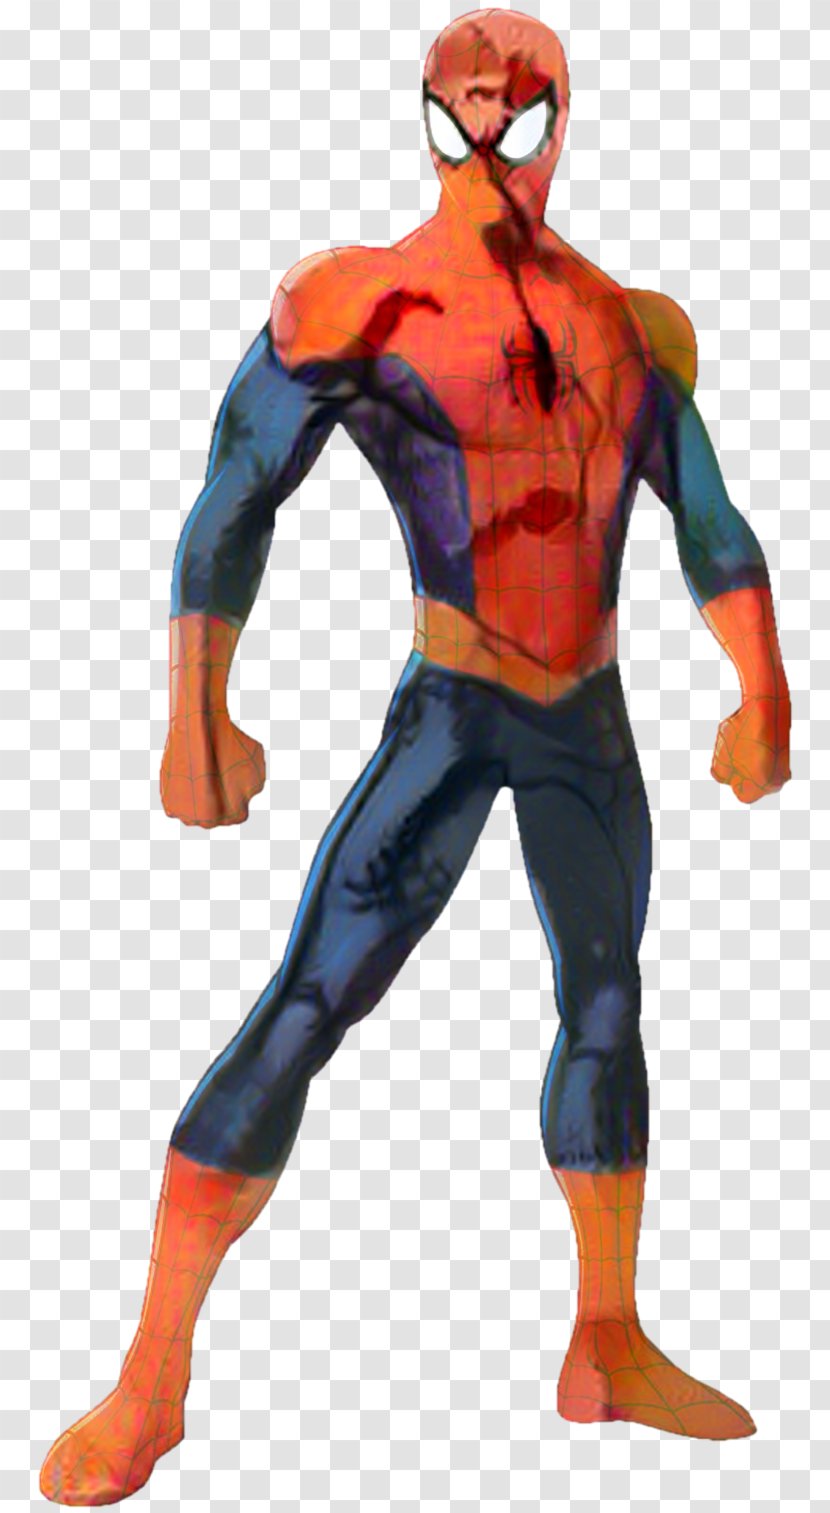 Spider-Man Superhero Video Games Film - Muscle - Television Show Transparent PNG